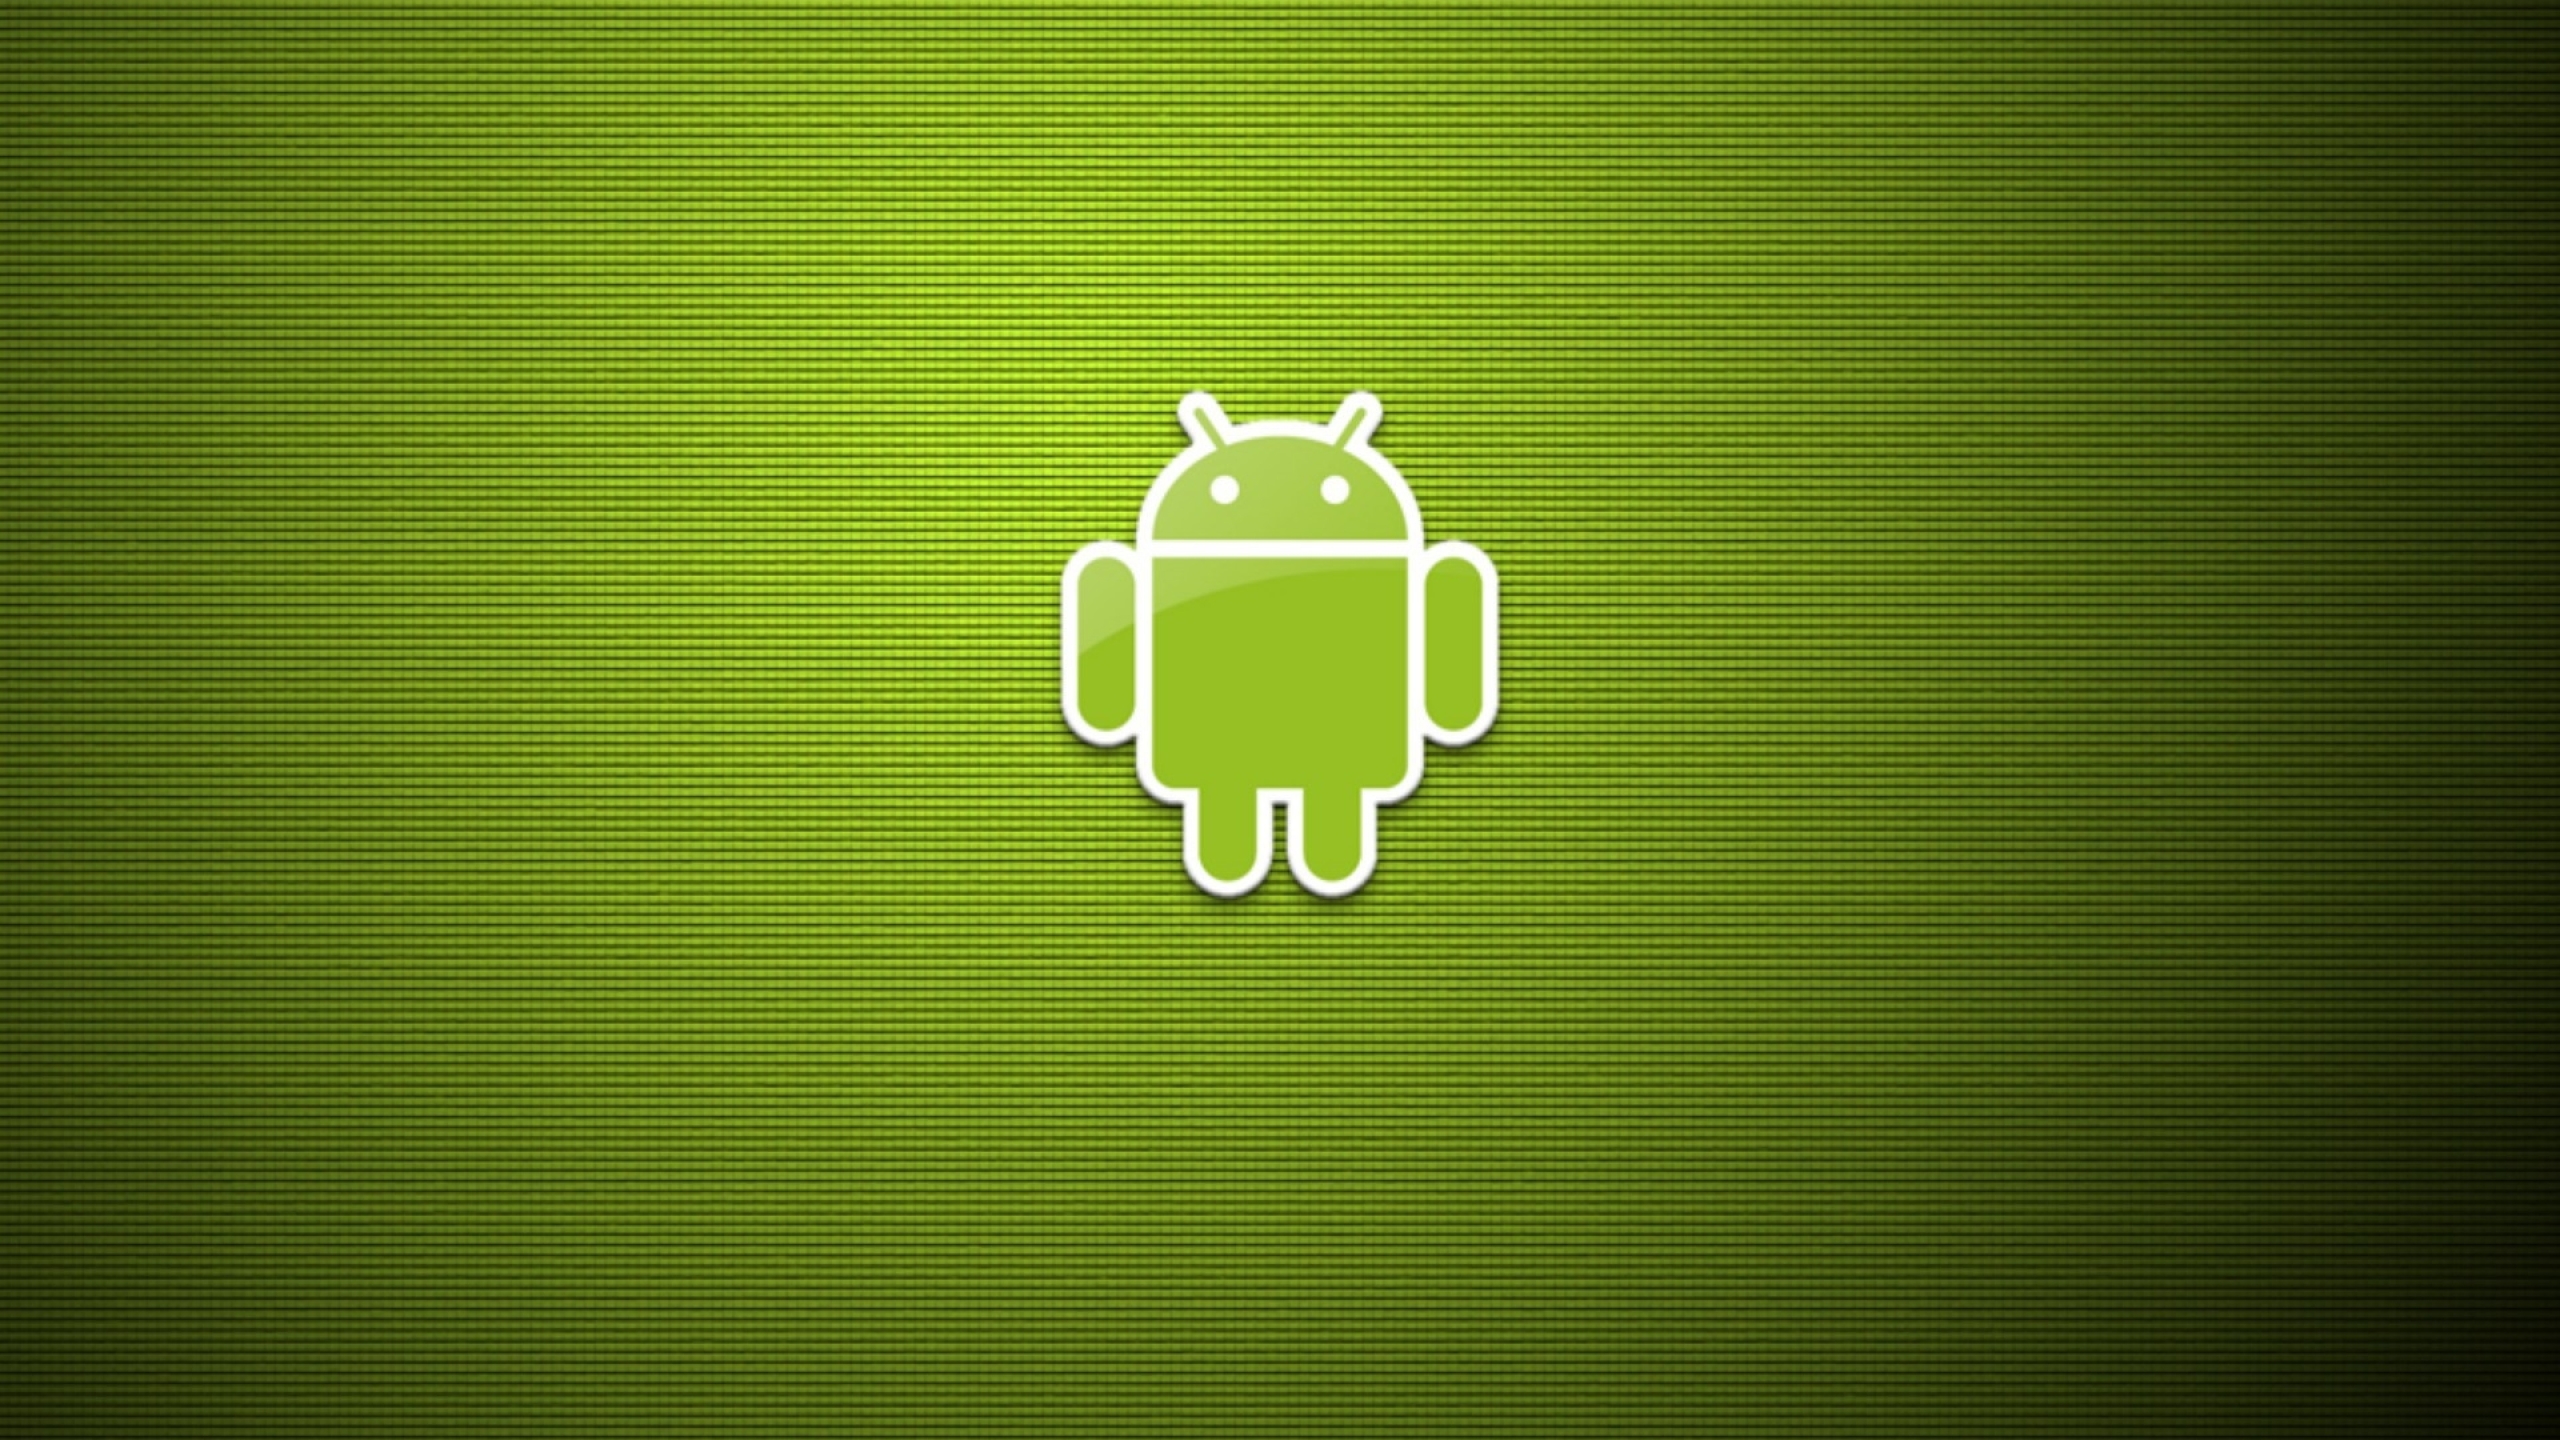 2560x1440 Android Logo Operating System 1440p Resolution Wallpaper Hd Hi Tech 4k Wallpapers Images Photos And Background Wallpapers Den